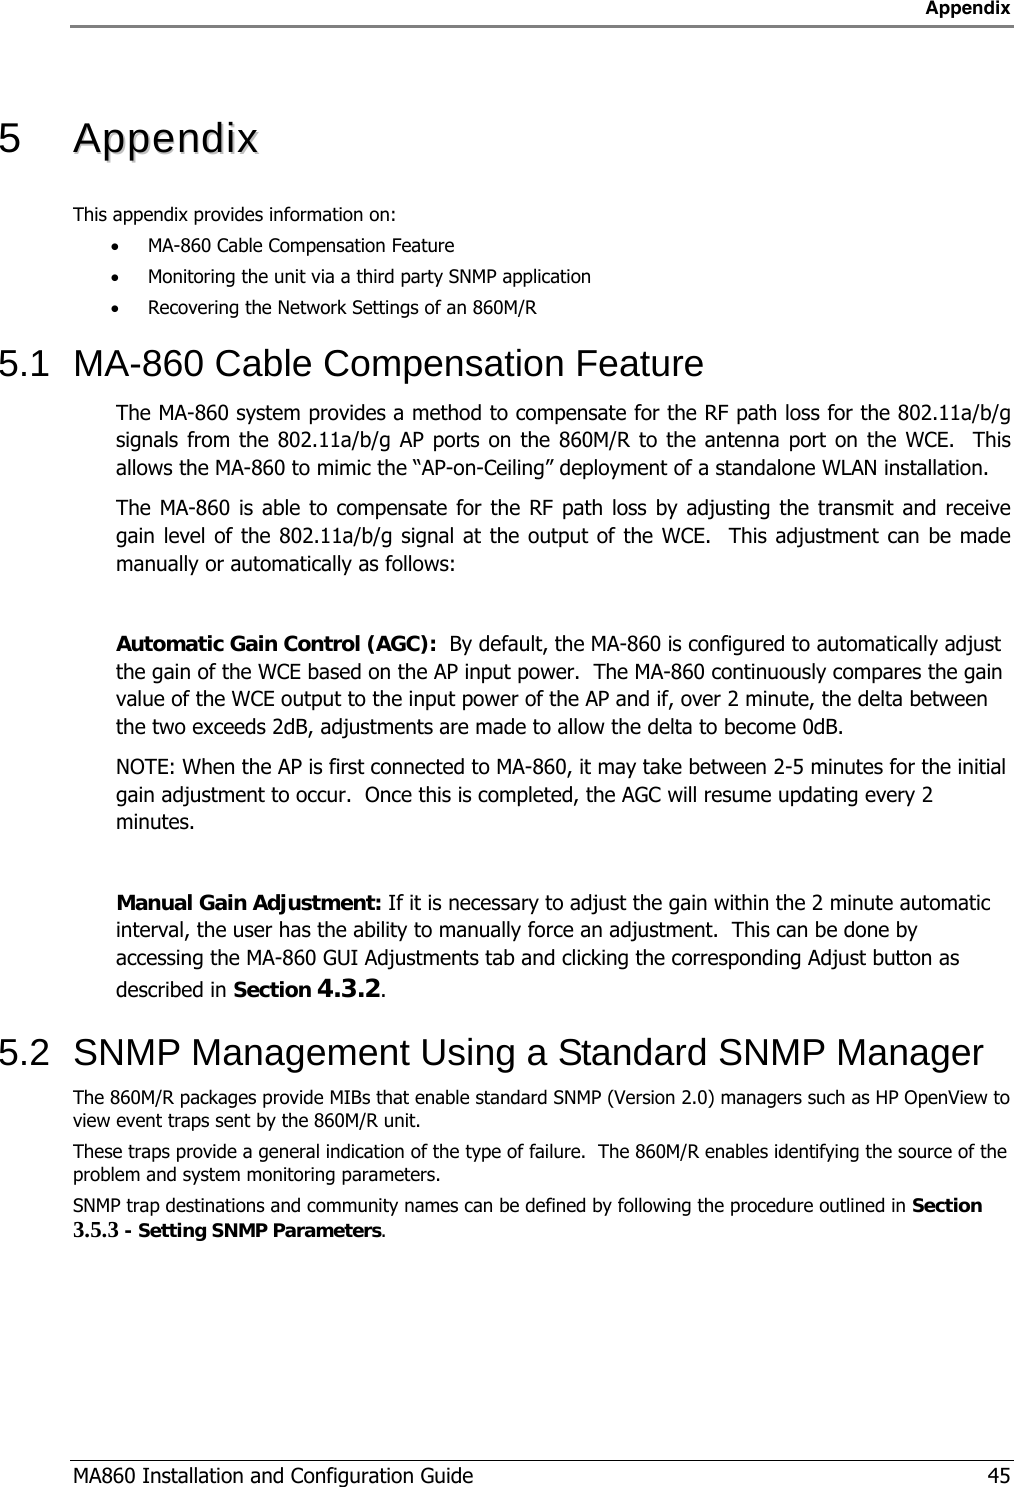 Appendix  MA860 Installation and Configuration Guide   45  5   AAppppeennddiixx  This appendix provides information on:  • MA-860 Cable Compensation Feature • Monitoring the unit via a third party SNMP application • Recovering the Network Settings of an 860M/R 5.1  MA-860 Cable Compensation Feature The MA-860 system provides a method to compensate for the RF path loss for the 802.11a/b/g signals from the 802.11a/b/g AP ports on the 860M/R to the antenna port on the WCE.  This allows the MA-860 to mimic the “AP-on-Ceiling” deployment of a standalone WLAN installation. The MA-860 is able to compensate for the RF path loss by adjusting the transmit and receive gain level of the 802.11a/b/g signal at the output of the WCE.  This adjustment can be made manually or automatically as follows:  Automatic Gain Control (AGC):  By default, the MA-860 is configured to automatically adjust the gain of the WCE based on the AP input power.  The MA-860 continuously compares the gain value of the WCE output to the input power of the AP and if, over 2 minute, the delta between the two exceeds 2dB, adjustments are made to allow the delta to become 0dB.   NOTE: When the AP is first connected to MA-860, it may take between 2-5 minutes for the initial gain adjustment to occur.  Once this is completed, the AGC will resume updating every 2 minutes.  Manual Gain Adjustment: If it is necessary to adjust the gain within the 2 minute automatic interval, the user has the ability to manually force an adjustment.  This can be done by accessing the MA-860 GUI Adjustments tab and clicking the corresponding Adjust button as described in Section  4.3.2. 5.2  SNMP Management Using a Standard SNMP Manager  The 860M/R packages provide MIBs that enable standard SNMP (Version 2.0) managers such as HP OpenView to view event traps sent by the 860M/R unit. These traps provide a general indication of the type of failure.  The 860M/R enables identifying the source of the problem and system monitoring parameters.  SNMP trap destinations and community names can be defined by following the procedure outlined in Section  3.5.3 - Setting SNMP Parameters. 